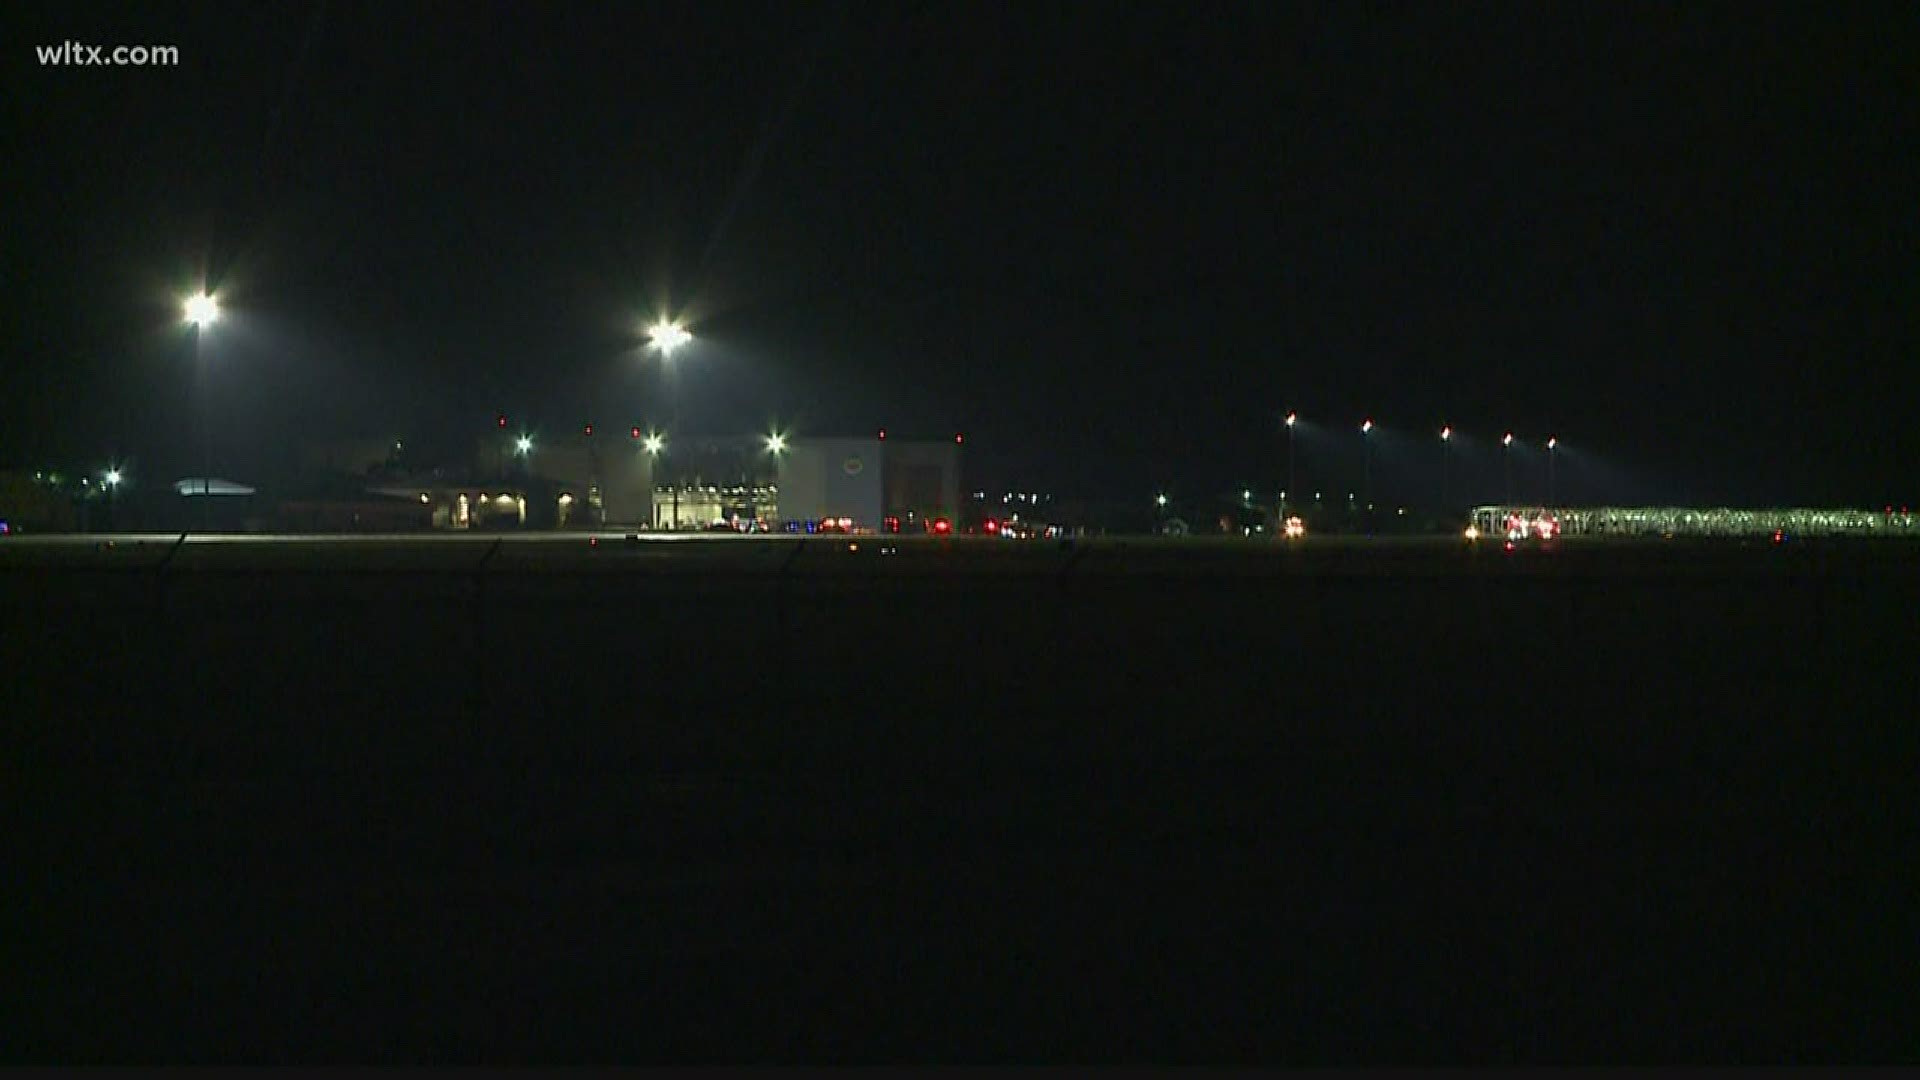 Shaw Air Force Base officials announced the pilot was killed in the crash late Tuesday night.